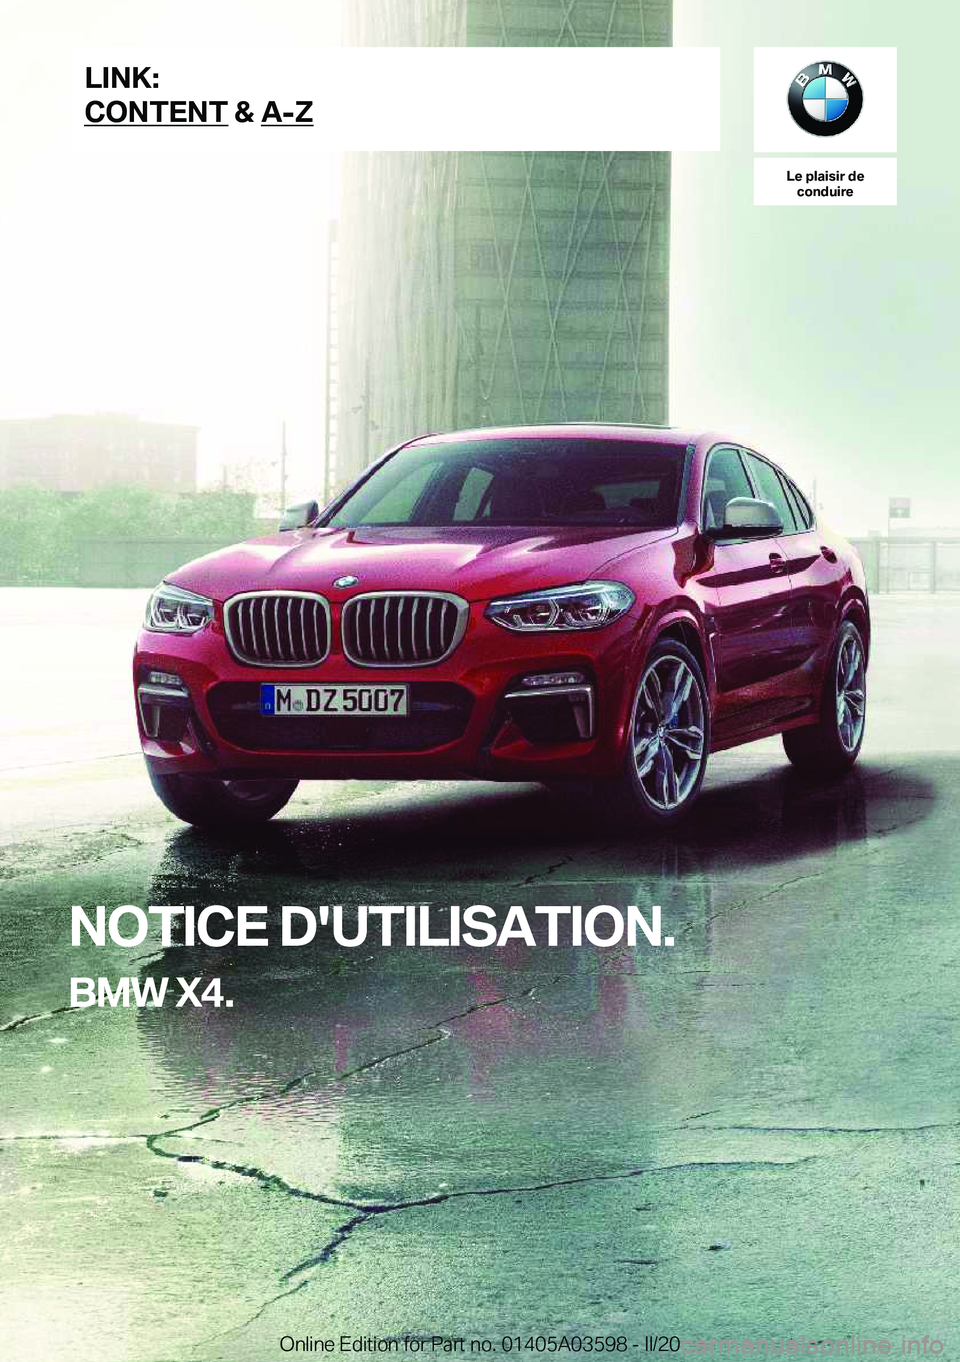 BMW X4 2020  Notices Demploi (in French) �L�e��p�l�a�i�s�i�r��d�e�c�o�n�d�u�i�r�e
�N�O�T�I�C�E��D�'�U�T�I�L�I�S�A�T�I�O�N�.
�B�M�W��X�4�.�L�I�N�K�:
�C�O�N�T�E�N�T��&��A�-�Z�O�n�l�i�n�e��E�d�i�t�i�o�n��f�o�r��P�a�r�t��n�o�.��0�